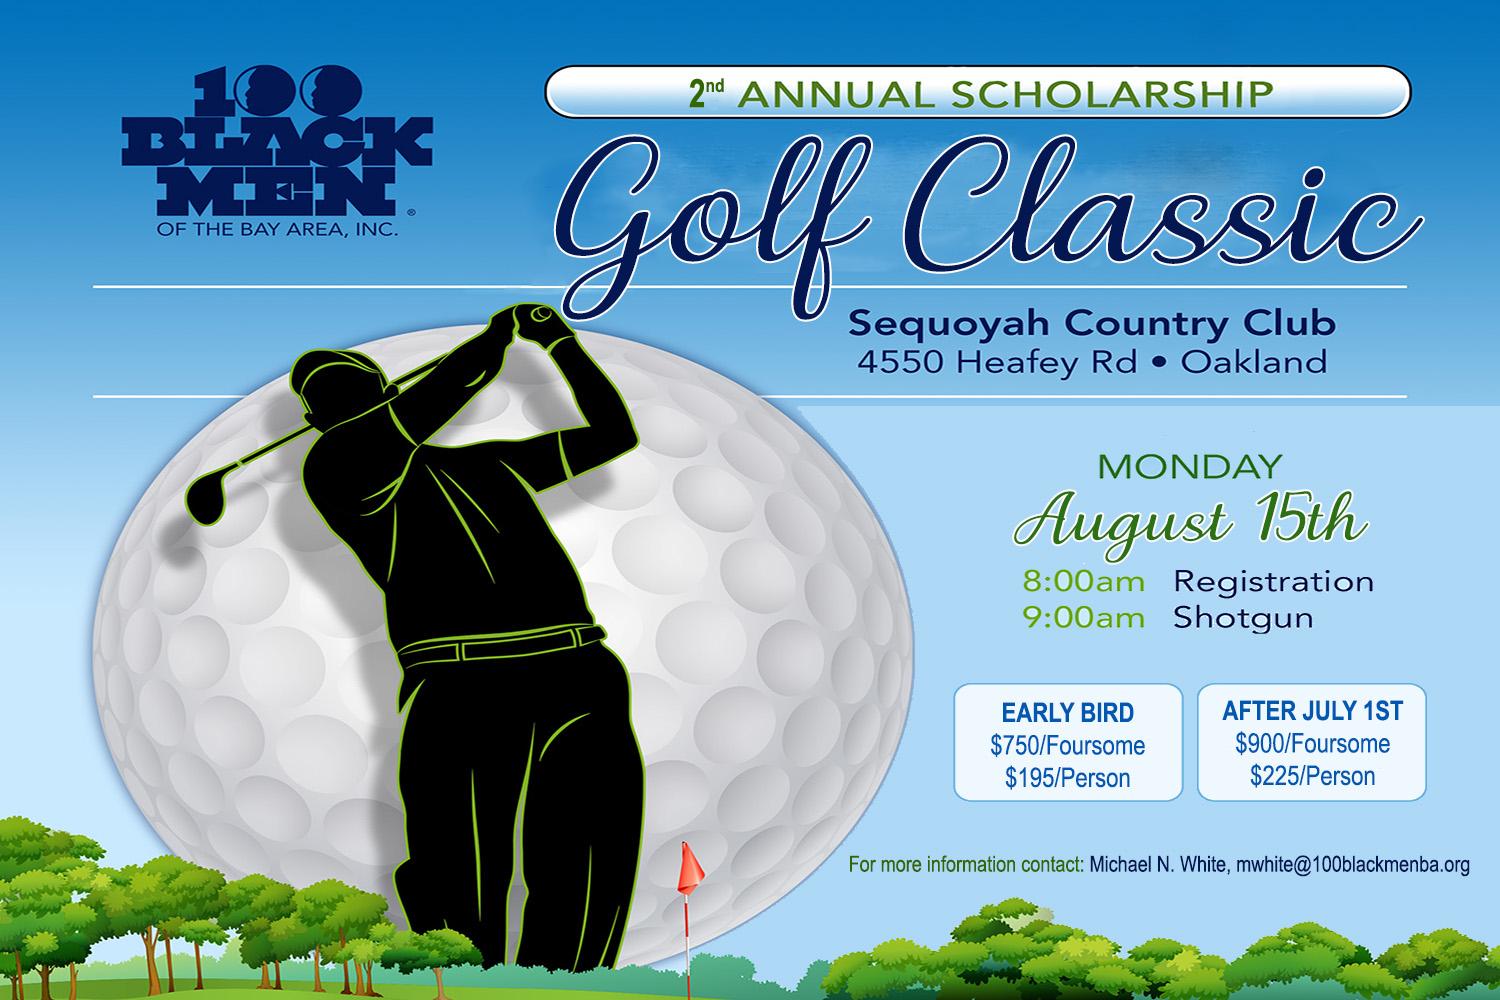 100 Black Men of the Bay Area's 2nd Annual Scholarship Golf Classic